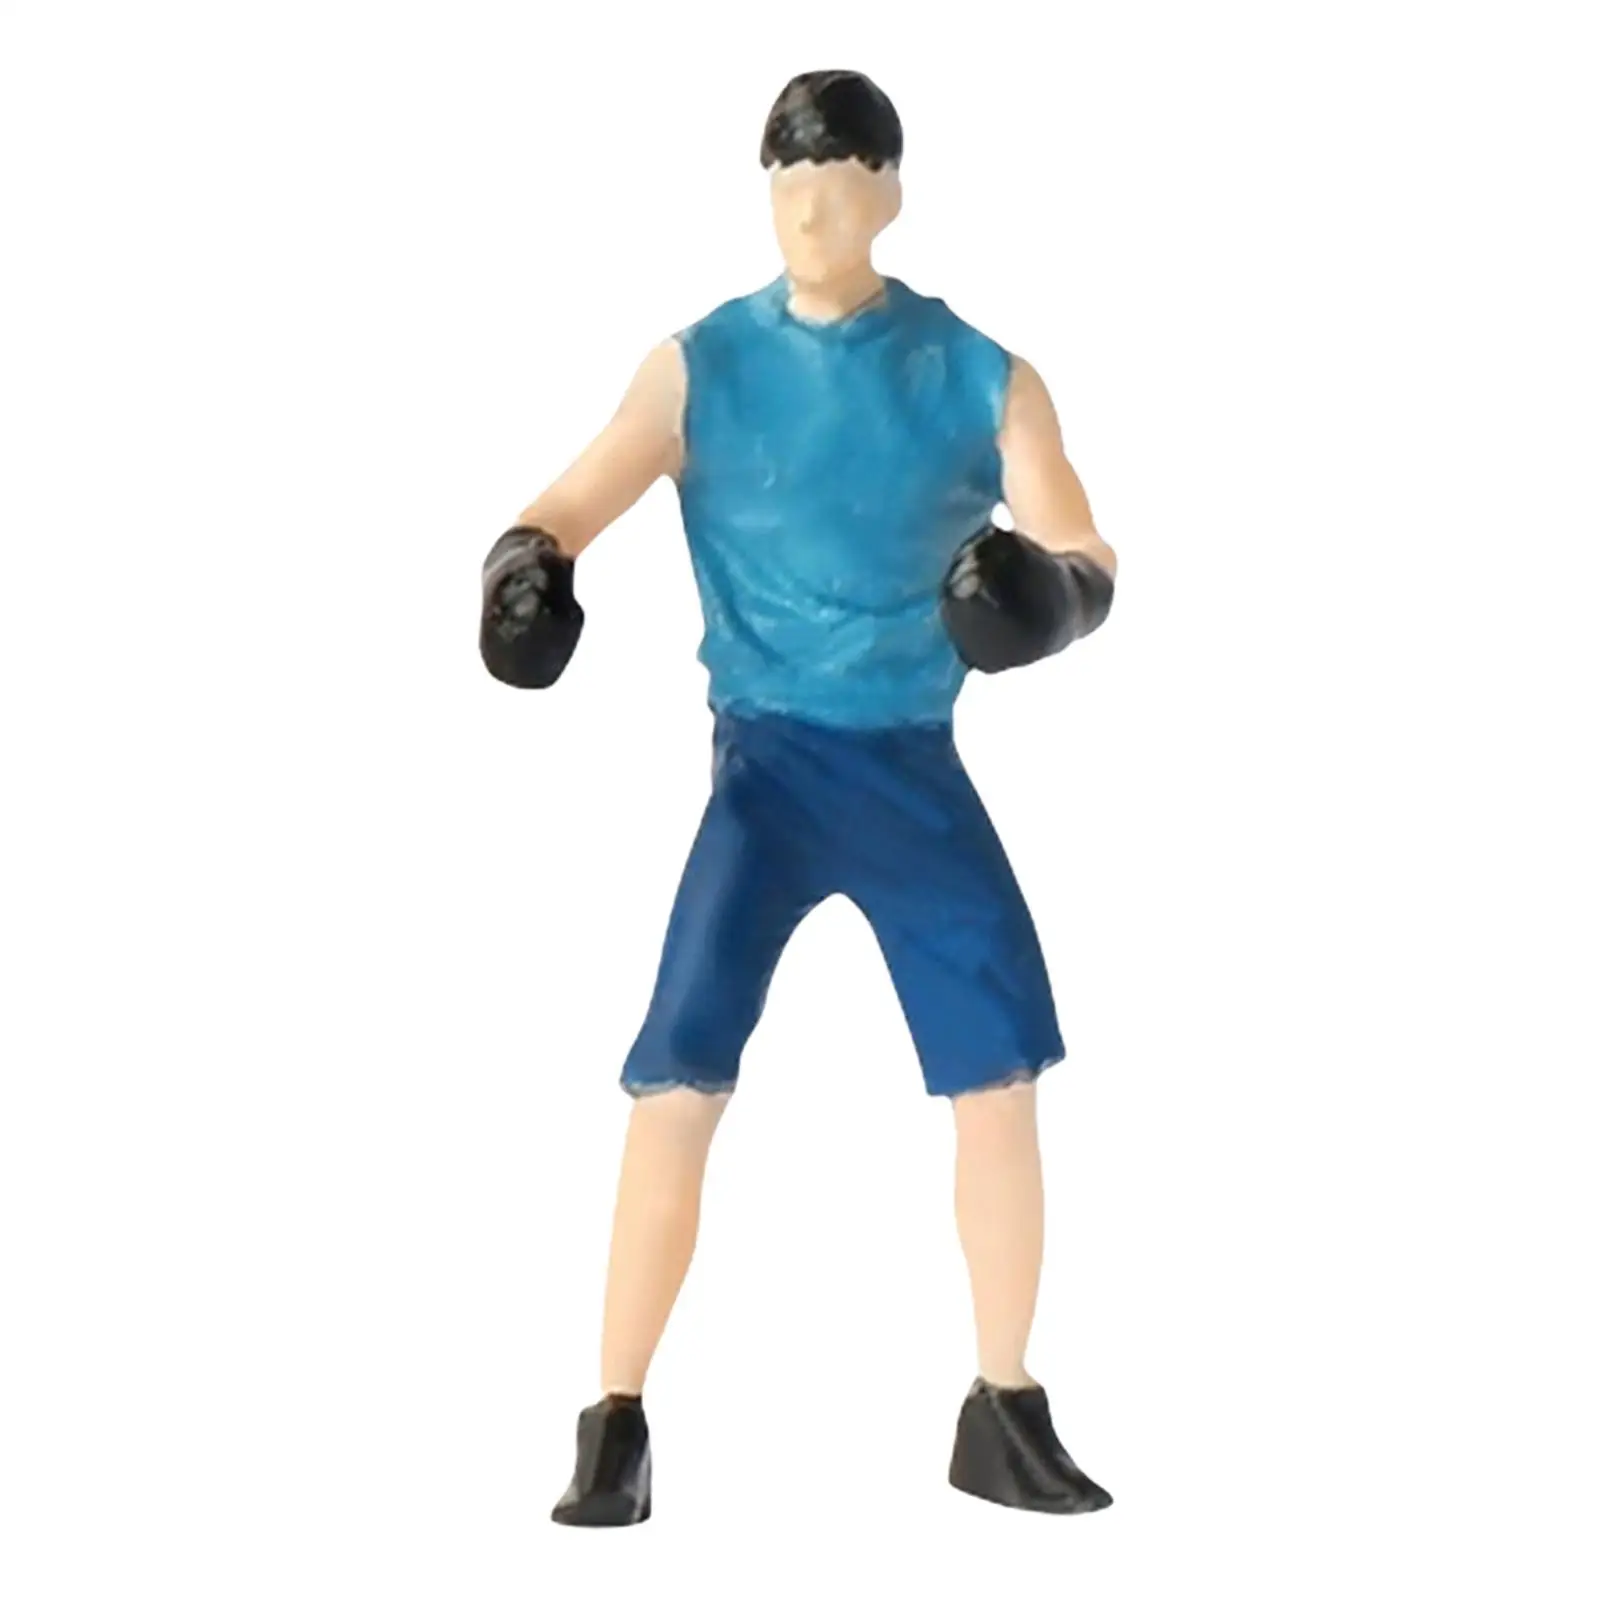 1:64 Scale Models Figurine Boxing Man People Figures Ornaments for Diorama